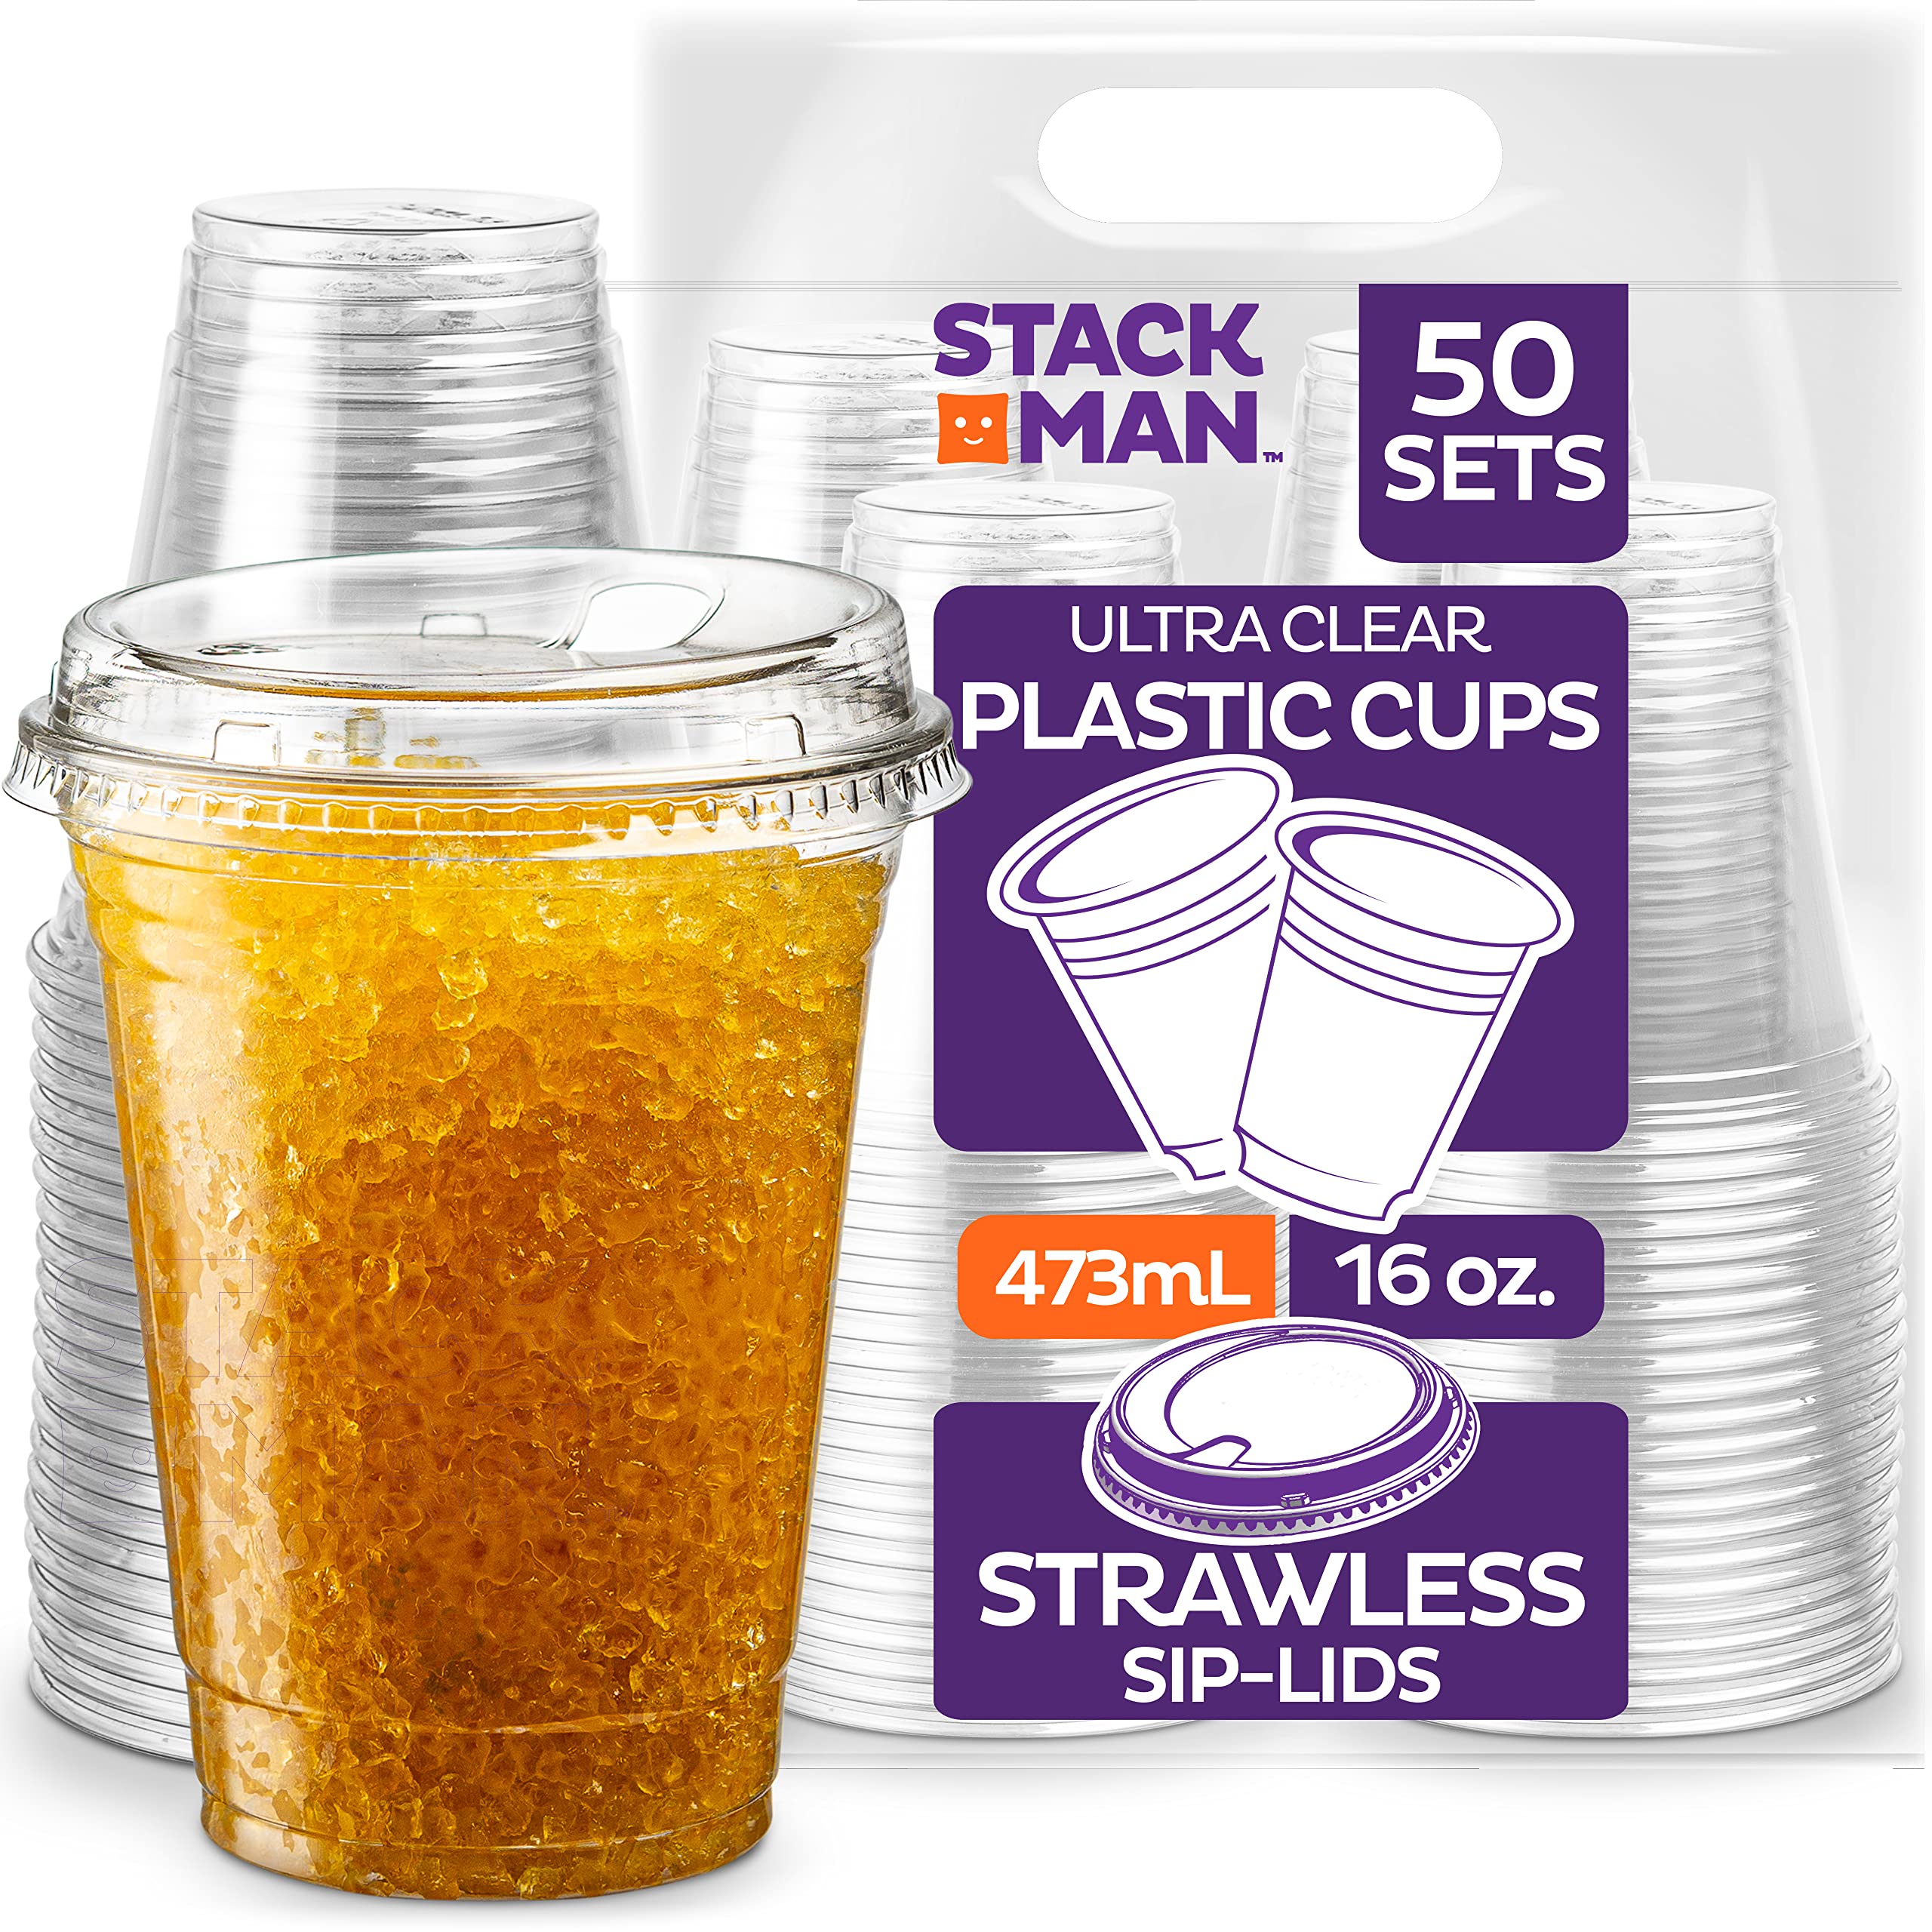 16 oz. Clear Cups with Strawless Sip-Lids, 50 Sets PET Crystal